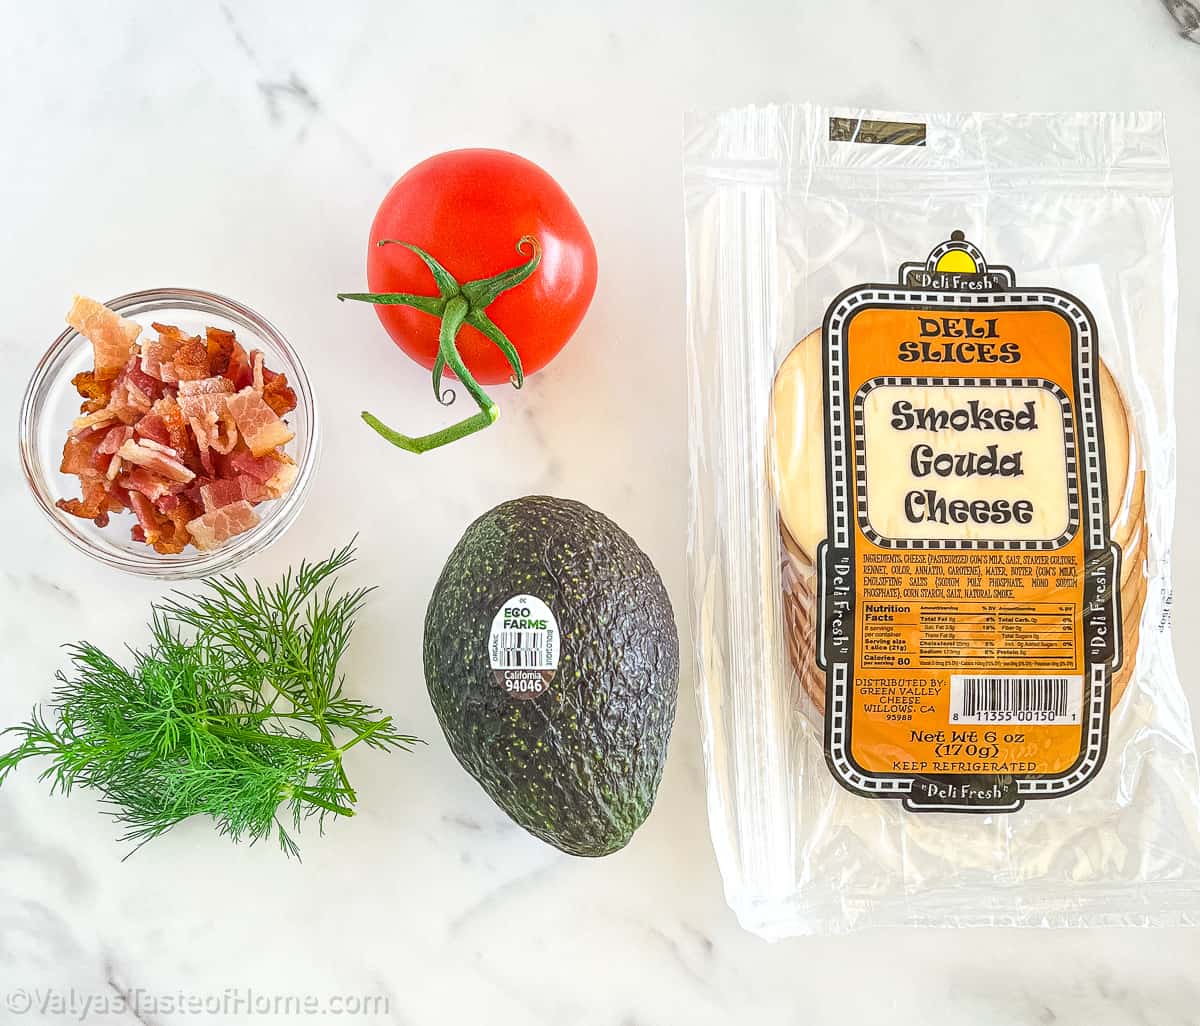 All you need are some simple pantry staple ingredients to make an omelette at home.